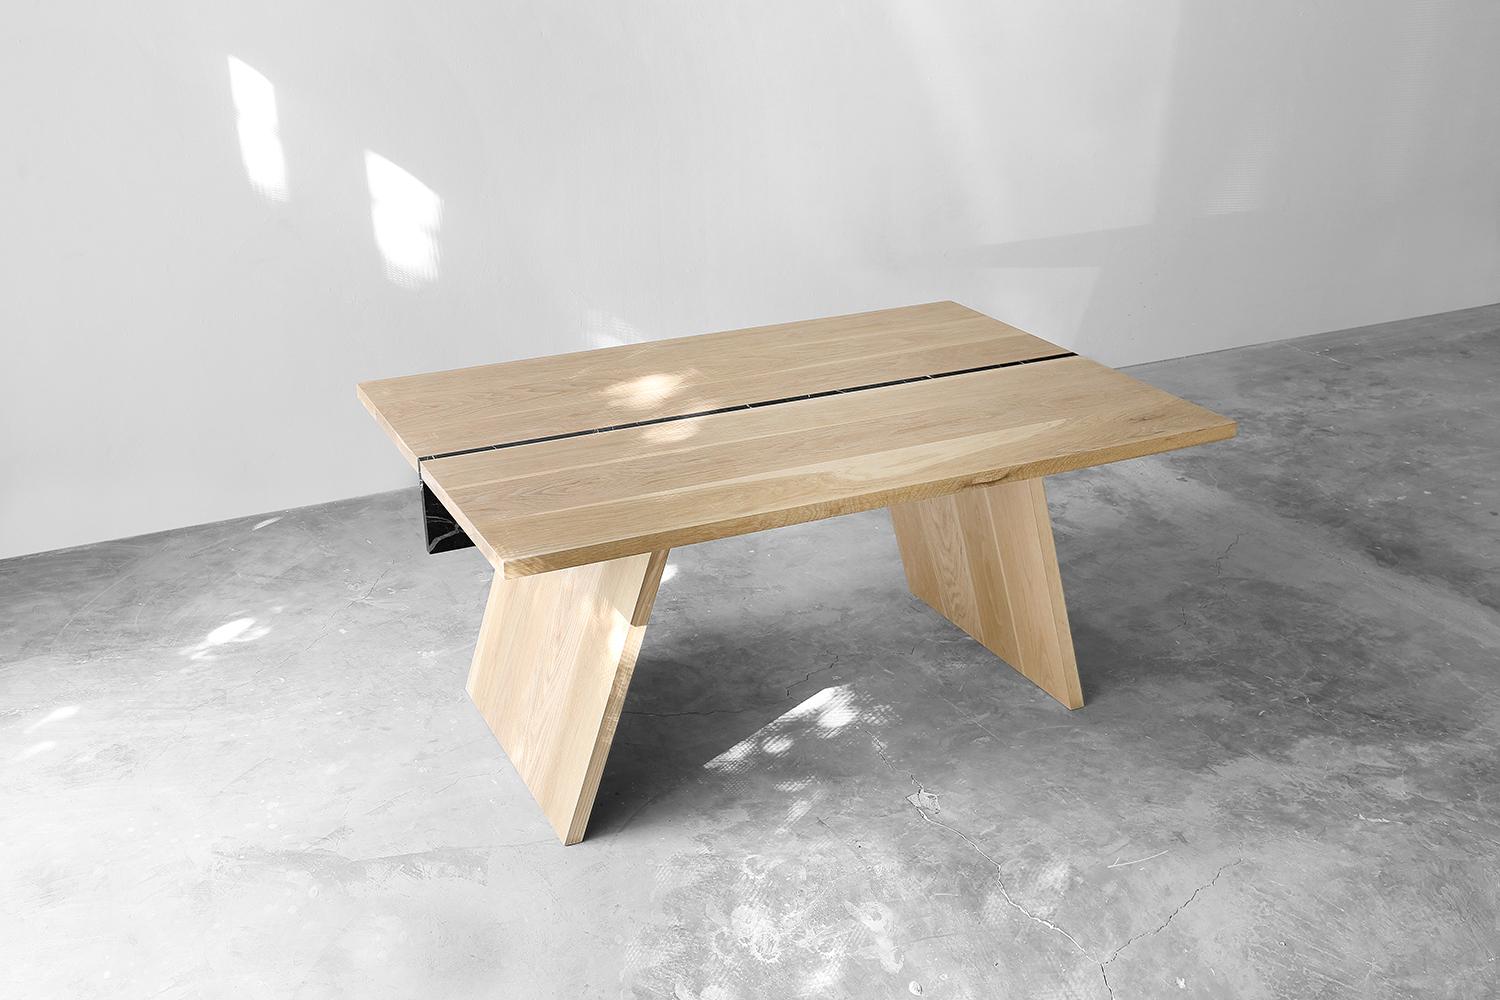 Laws of Motion Desk in Solid Oak Wood, Home Office Writing Desk by Joel Escalona

Laws of Motion is a furniture collection that through a series of different typologies explores concepts like force, gravity and movement. Each of these functional